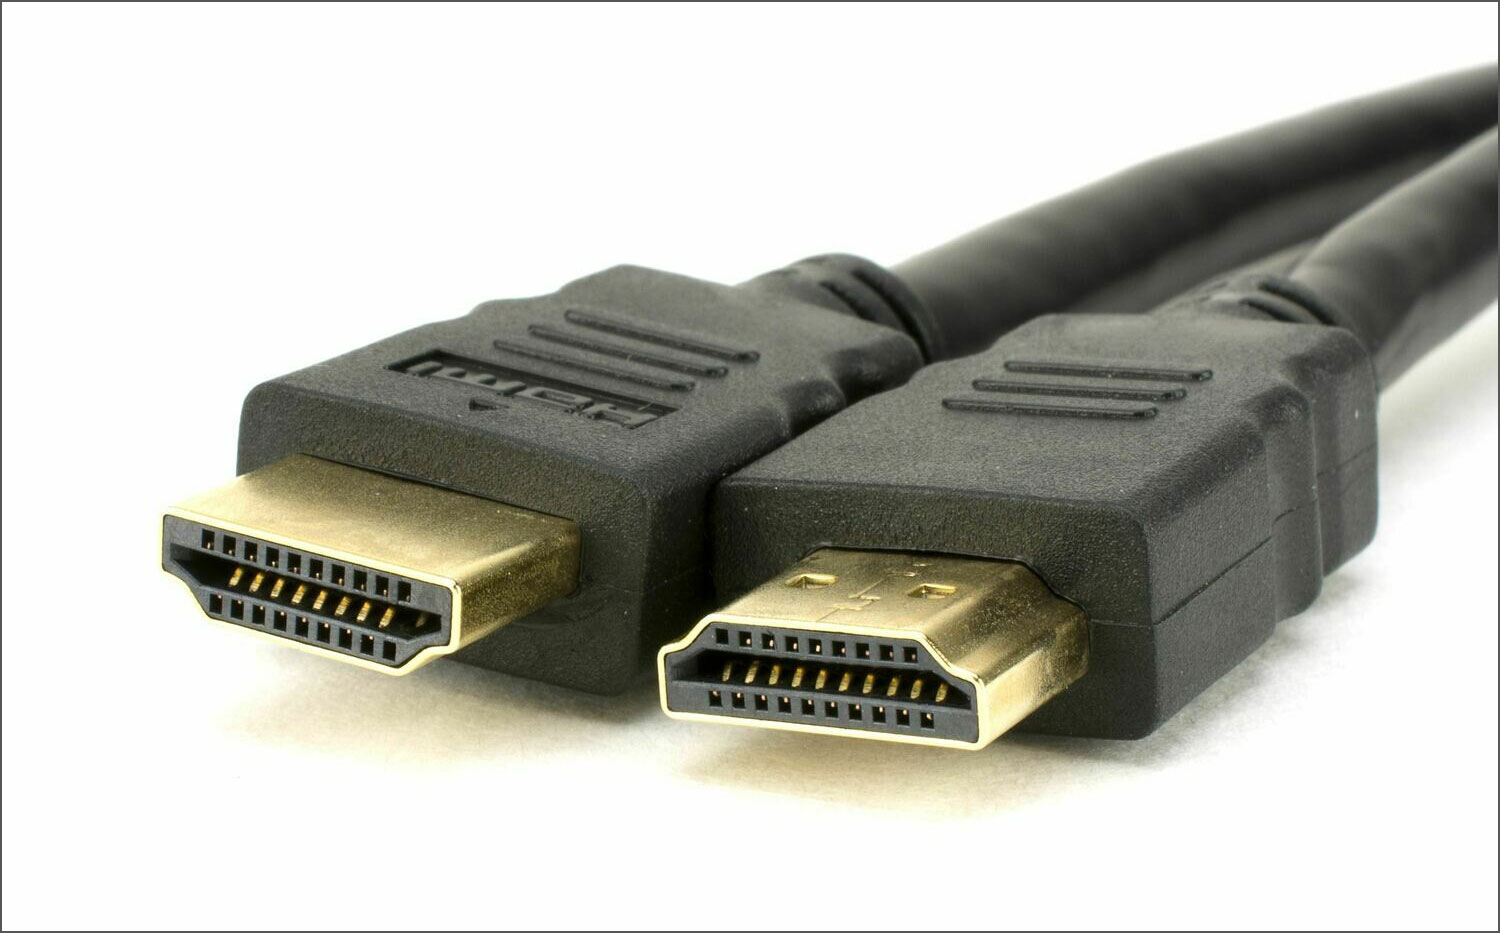 HDMI (High-Definition Multimedia Interface) Connectors